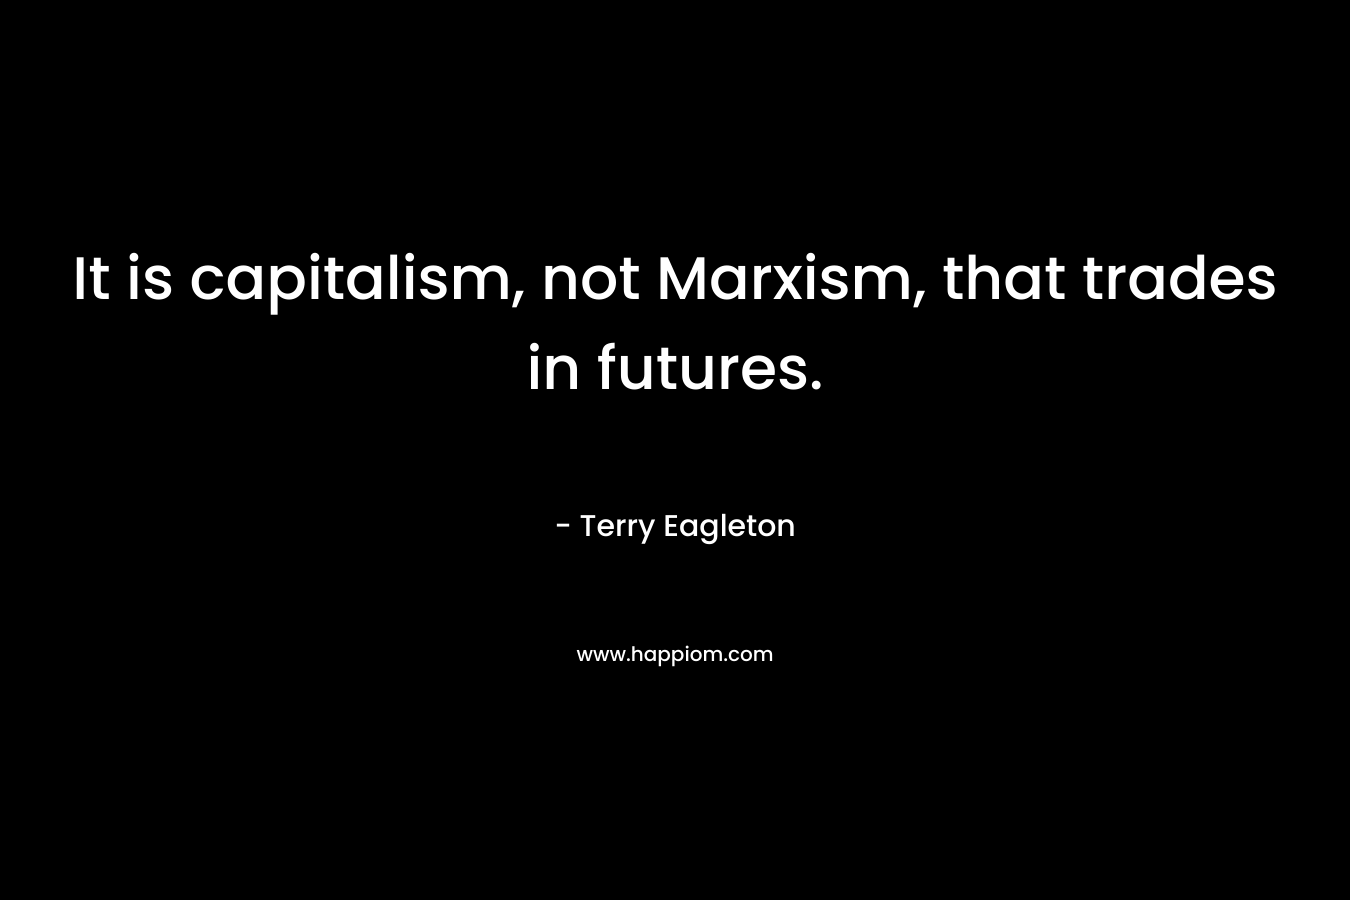 It is capitalism, not Marxism, that trades in futures. – Terry Eagleton